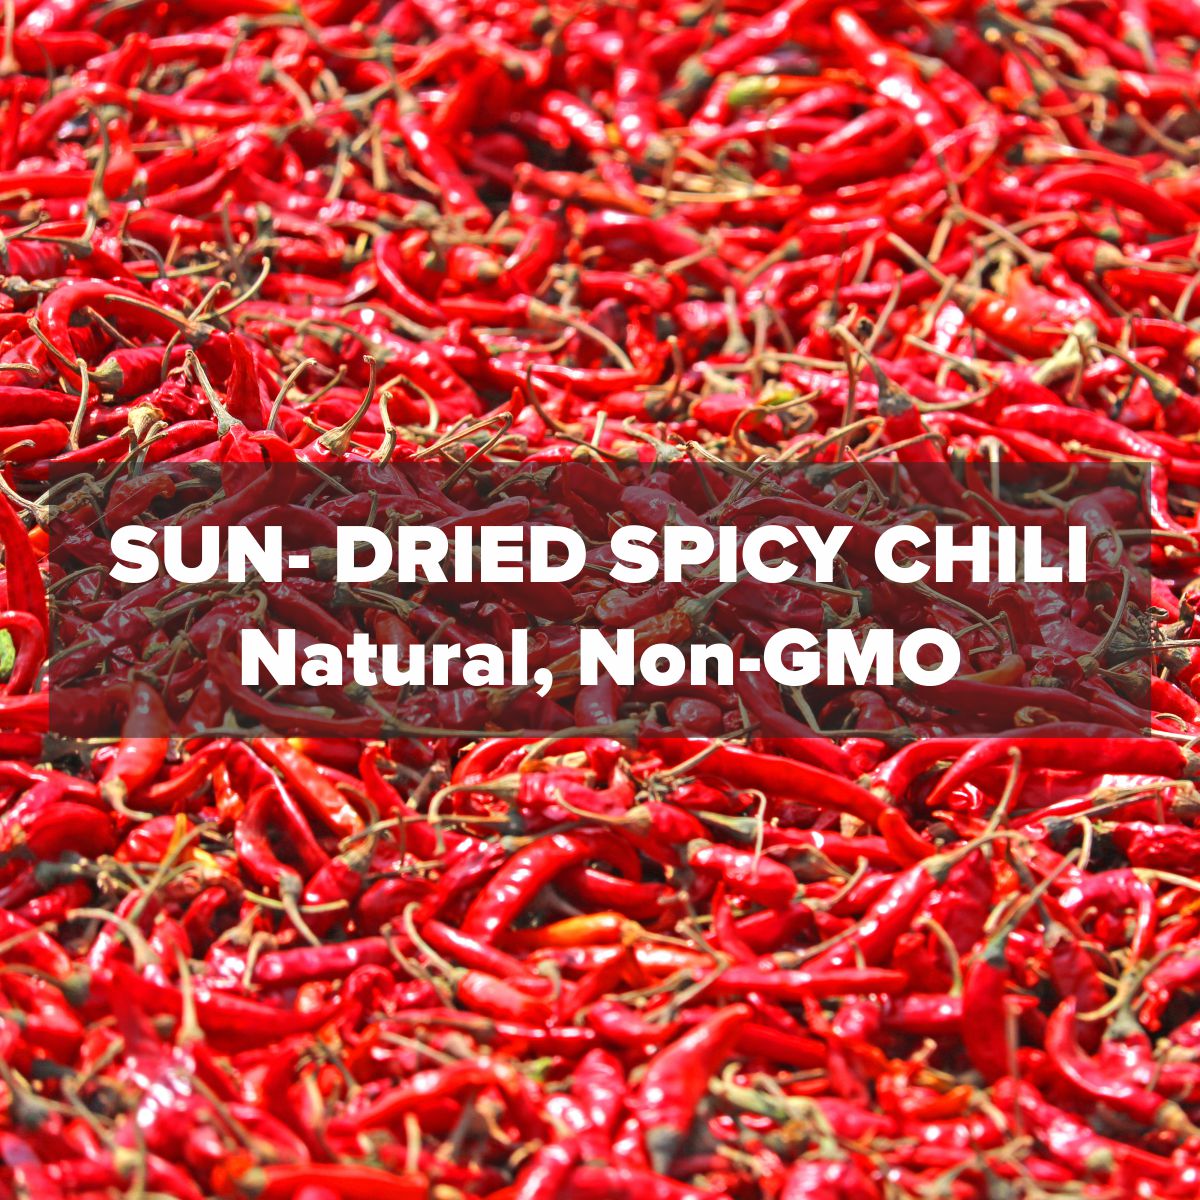 Dried Spicy Red Chilis 100g